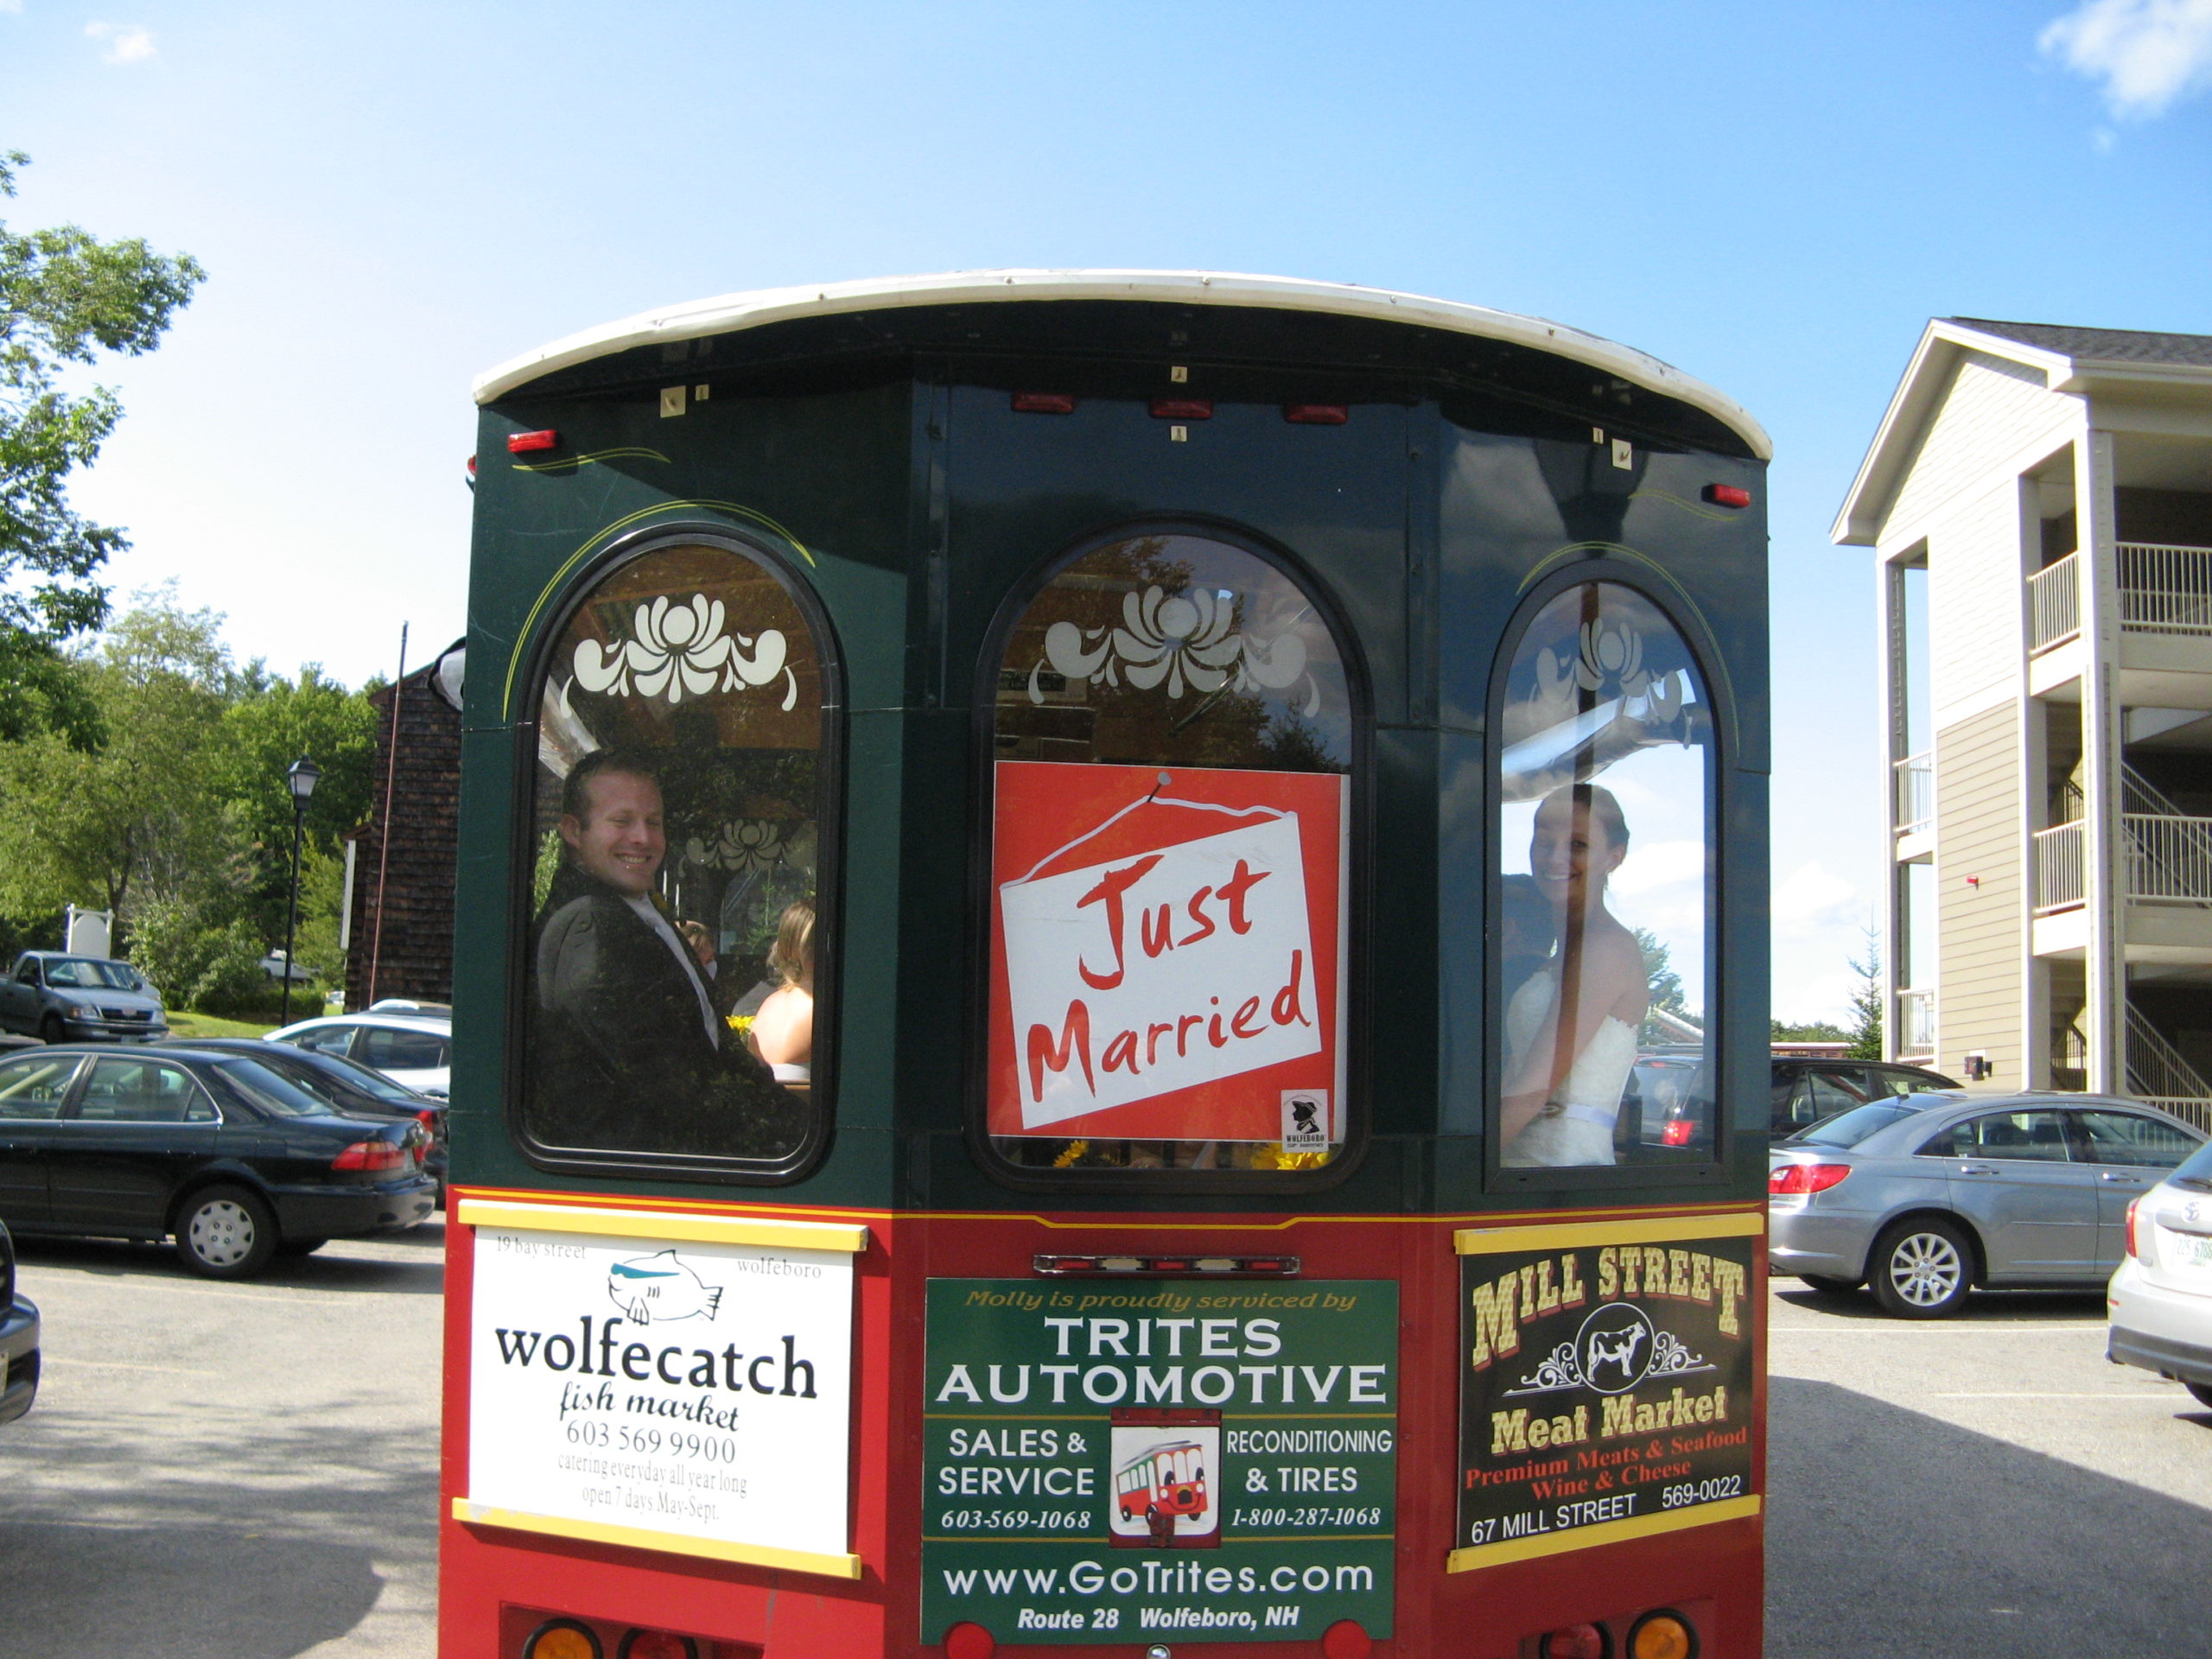 Molley - Just Married Trolley